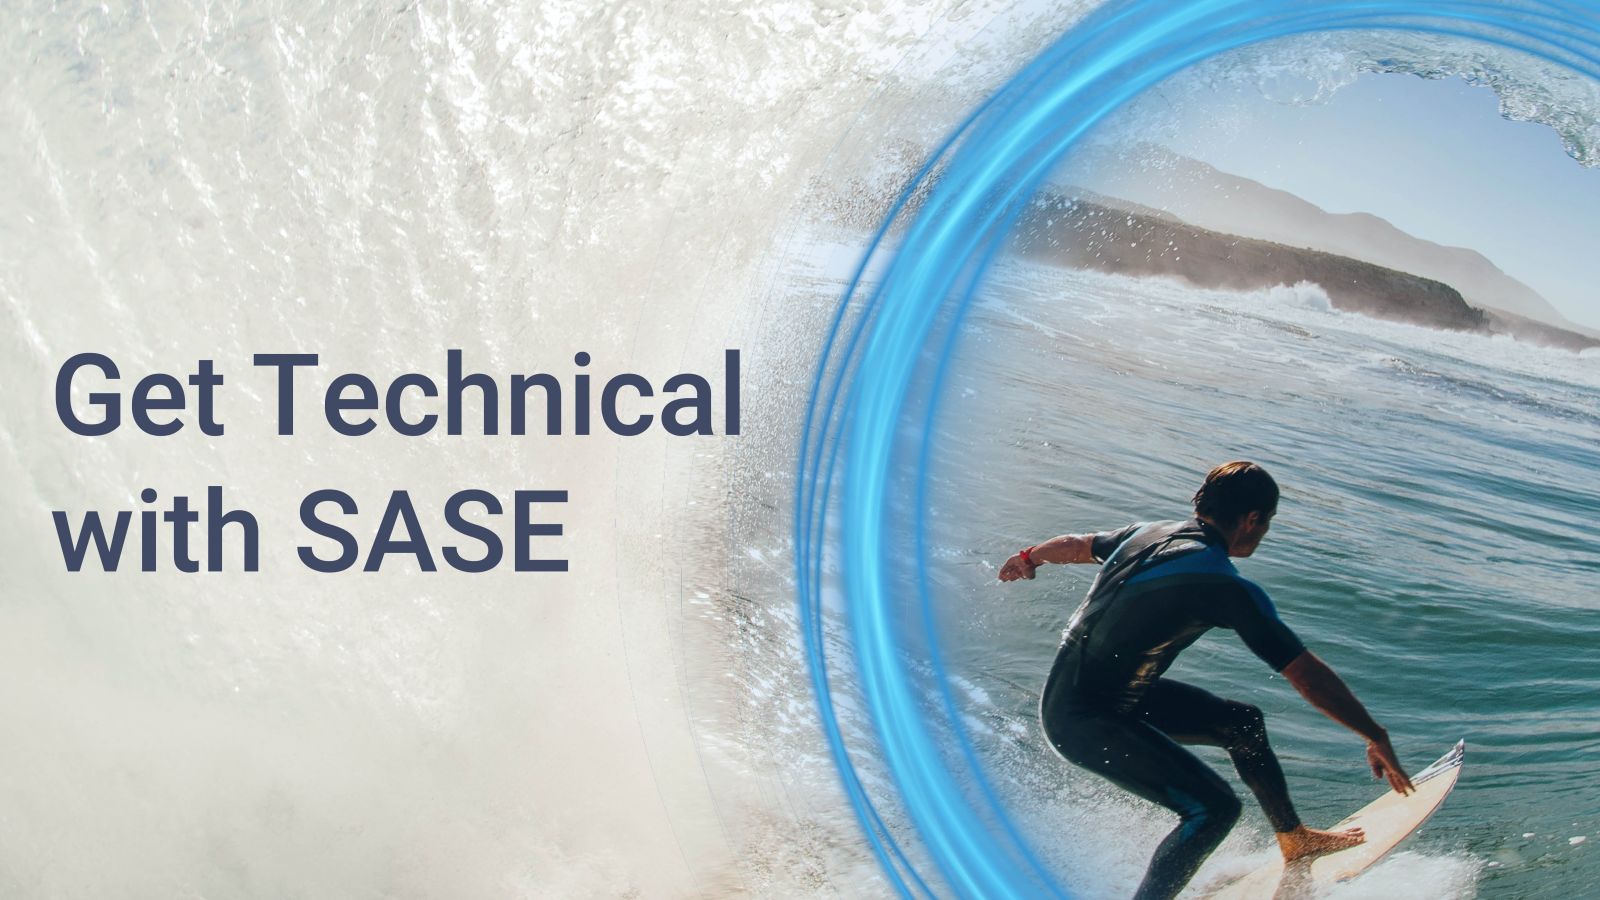 ON DEMAND - Discover SASE with Ingram Micro: Get technical with SASE Featured Image